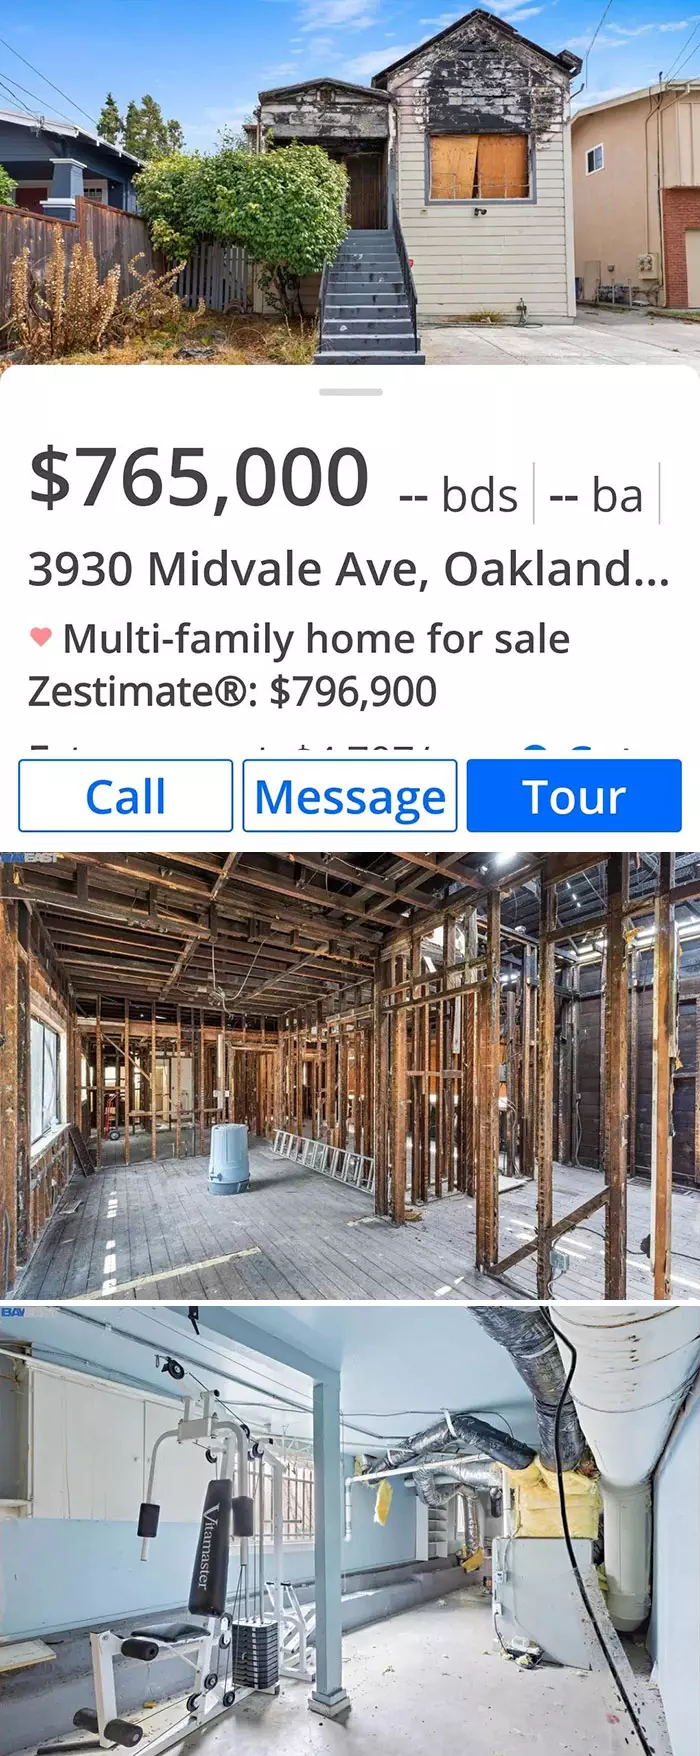 30 Ridiculous Real Estate Listing That Are Just Shameful